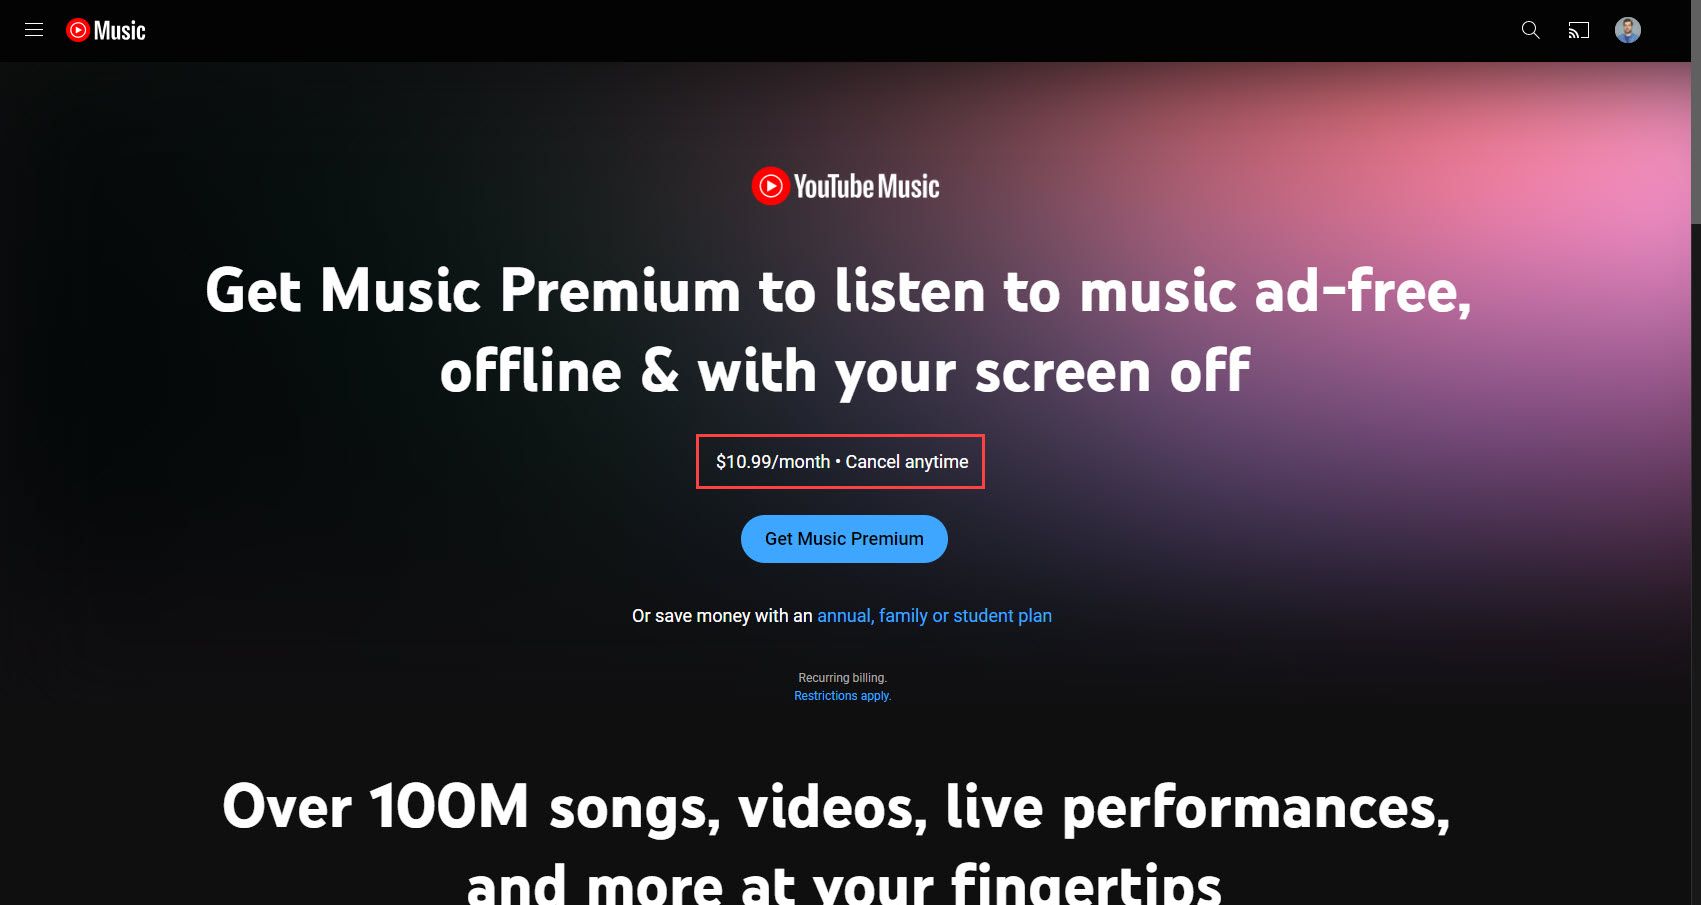 YouTube Music sign-up page.